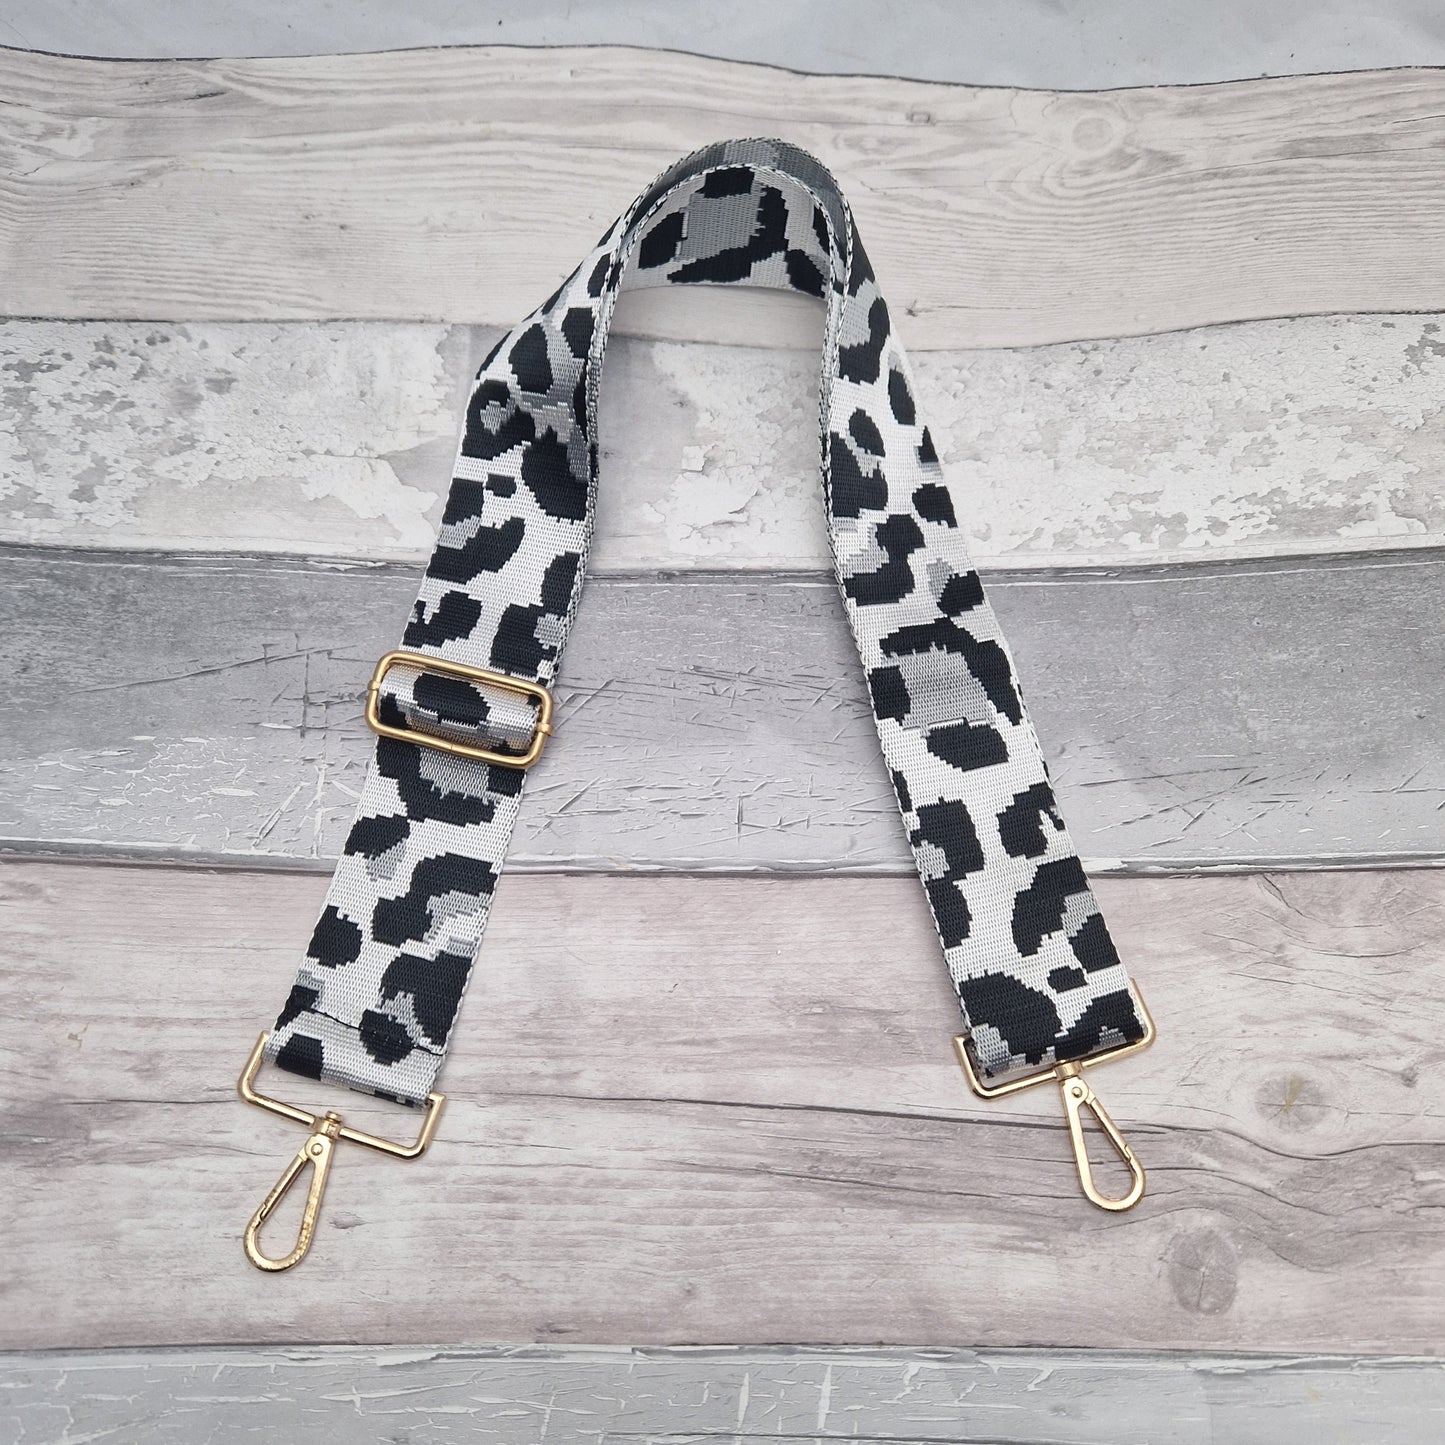 Leopard print bag strap in white, black and silver with gold metalwork